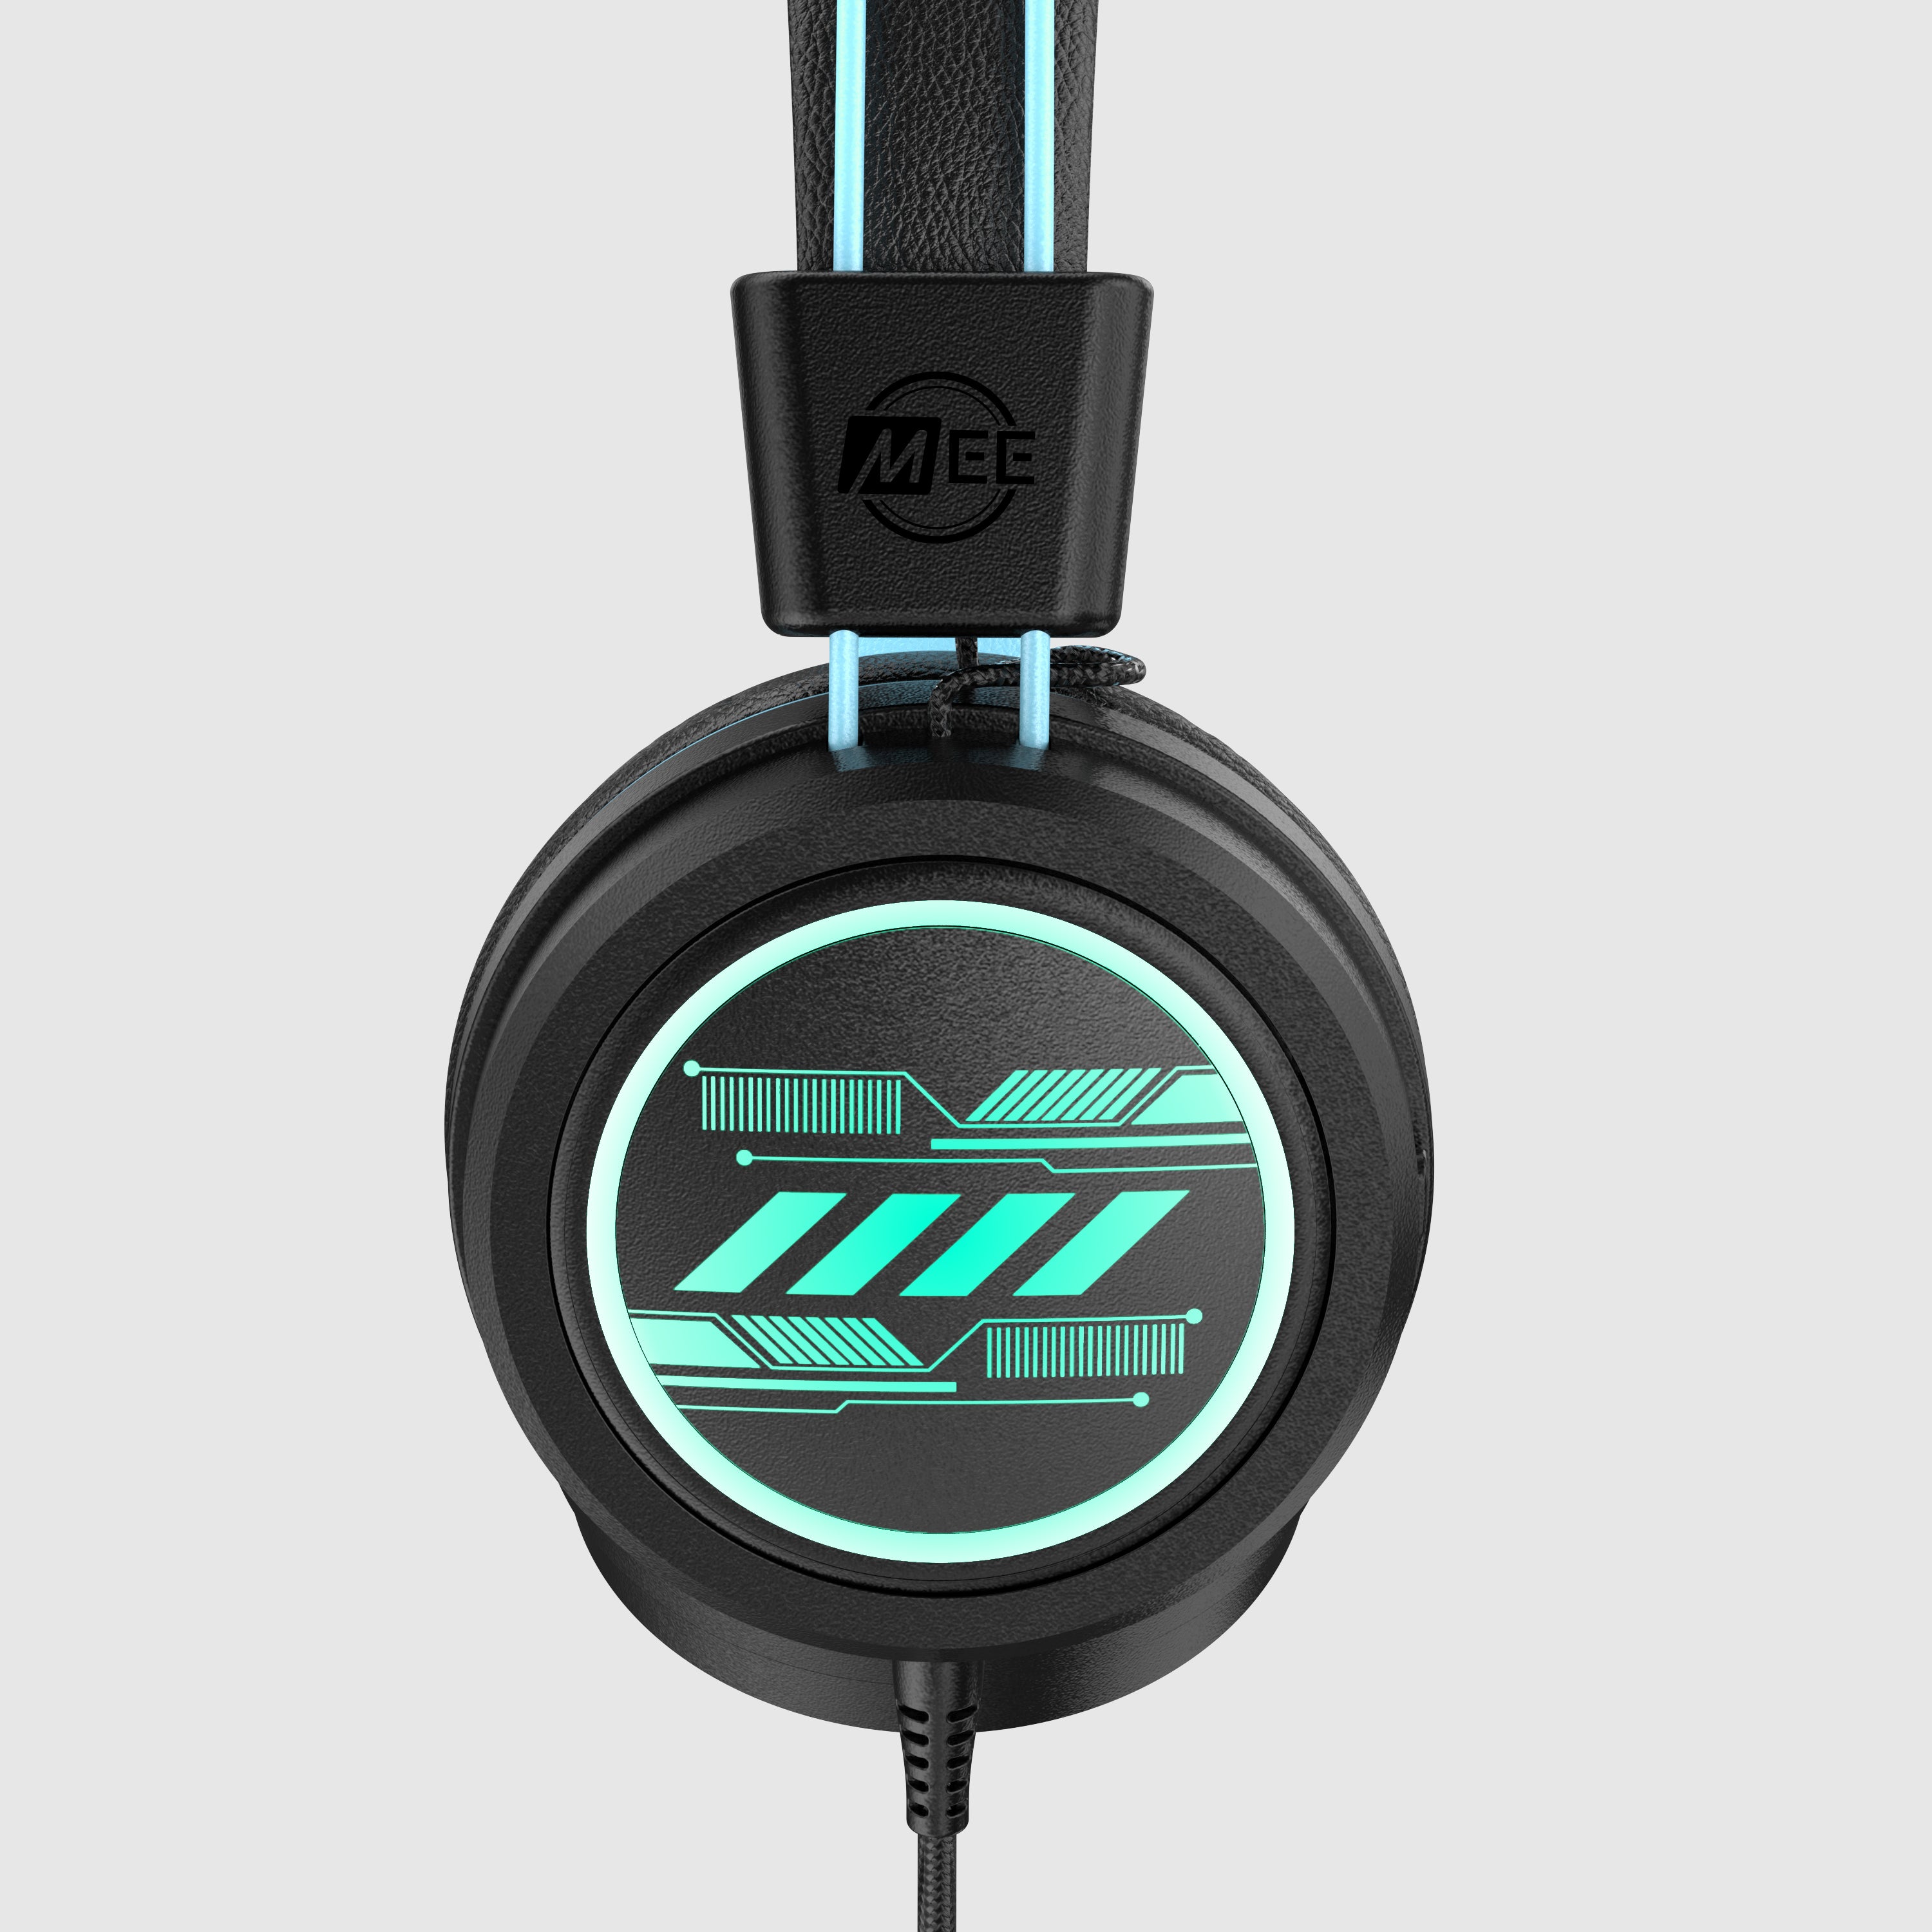 Close-up view of a modern headphone with cyan lighting accent on the earcup, featuring a geometric design and a visible brand logo â€œmeeâ€.